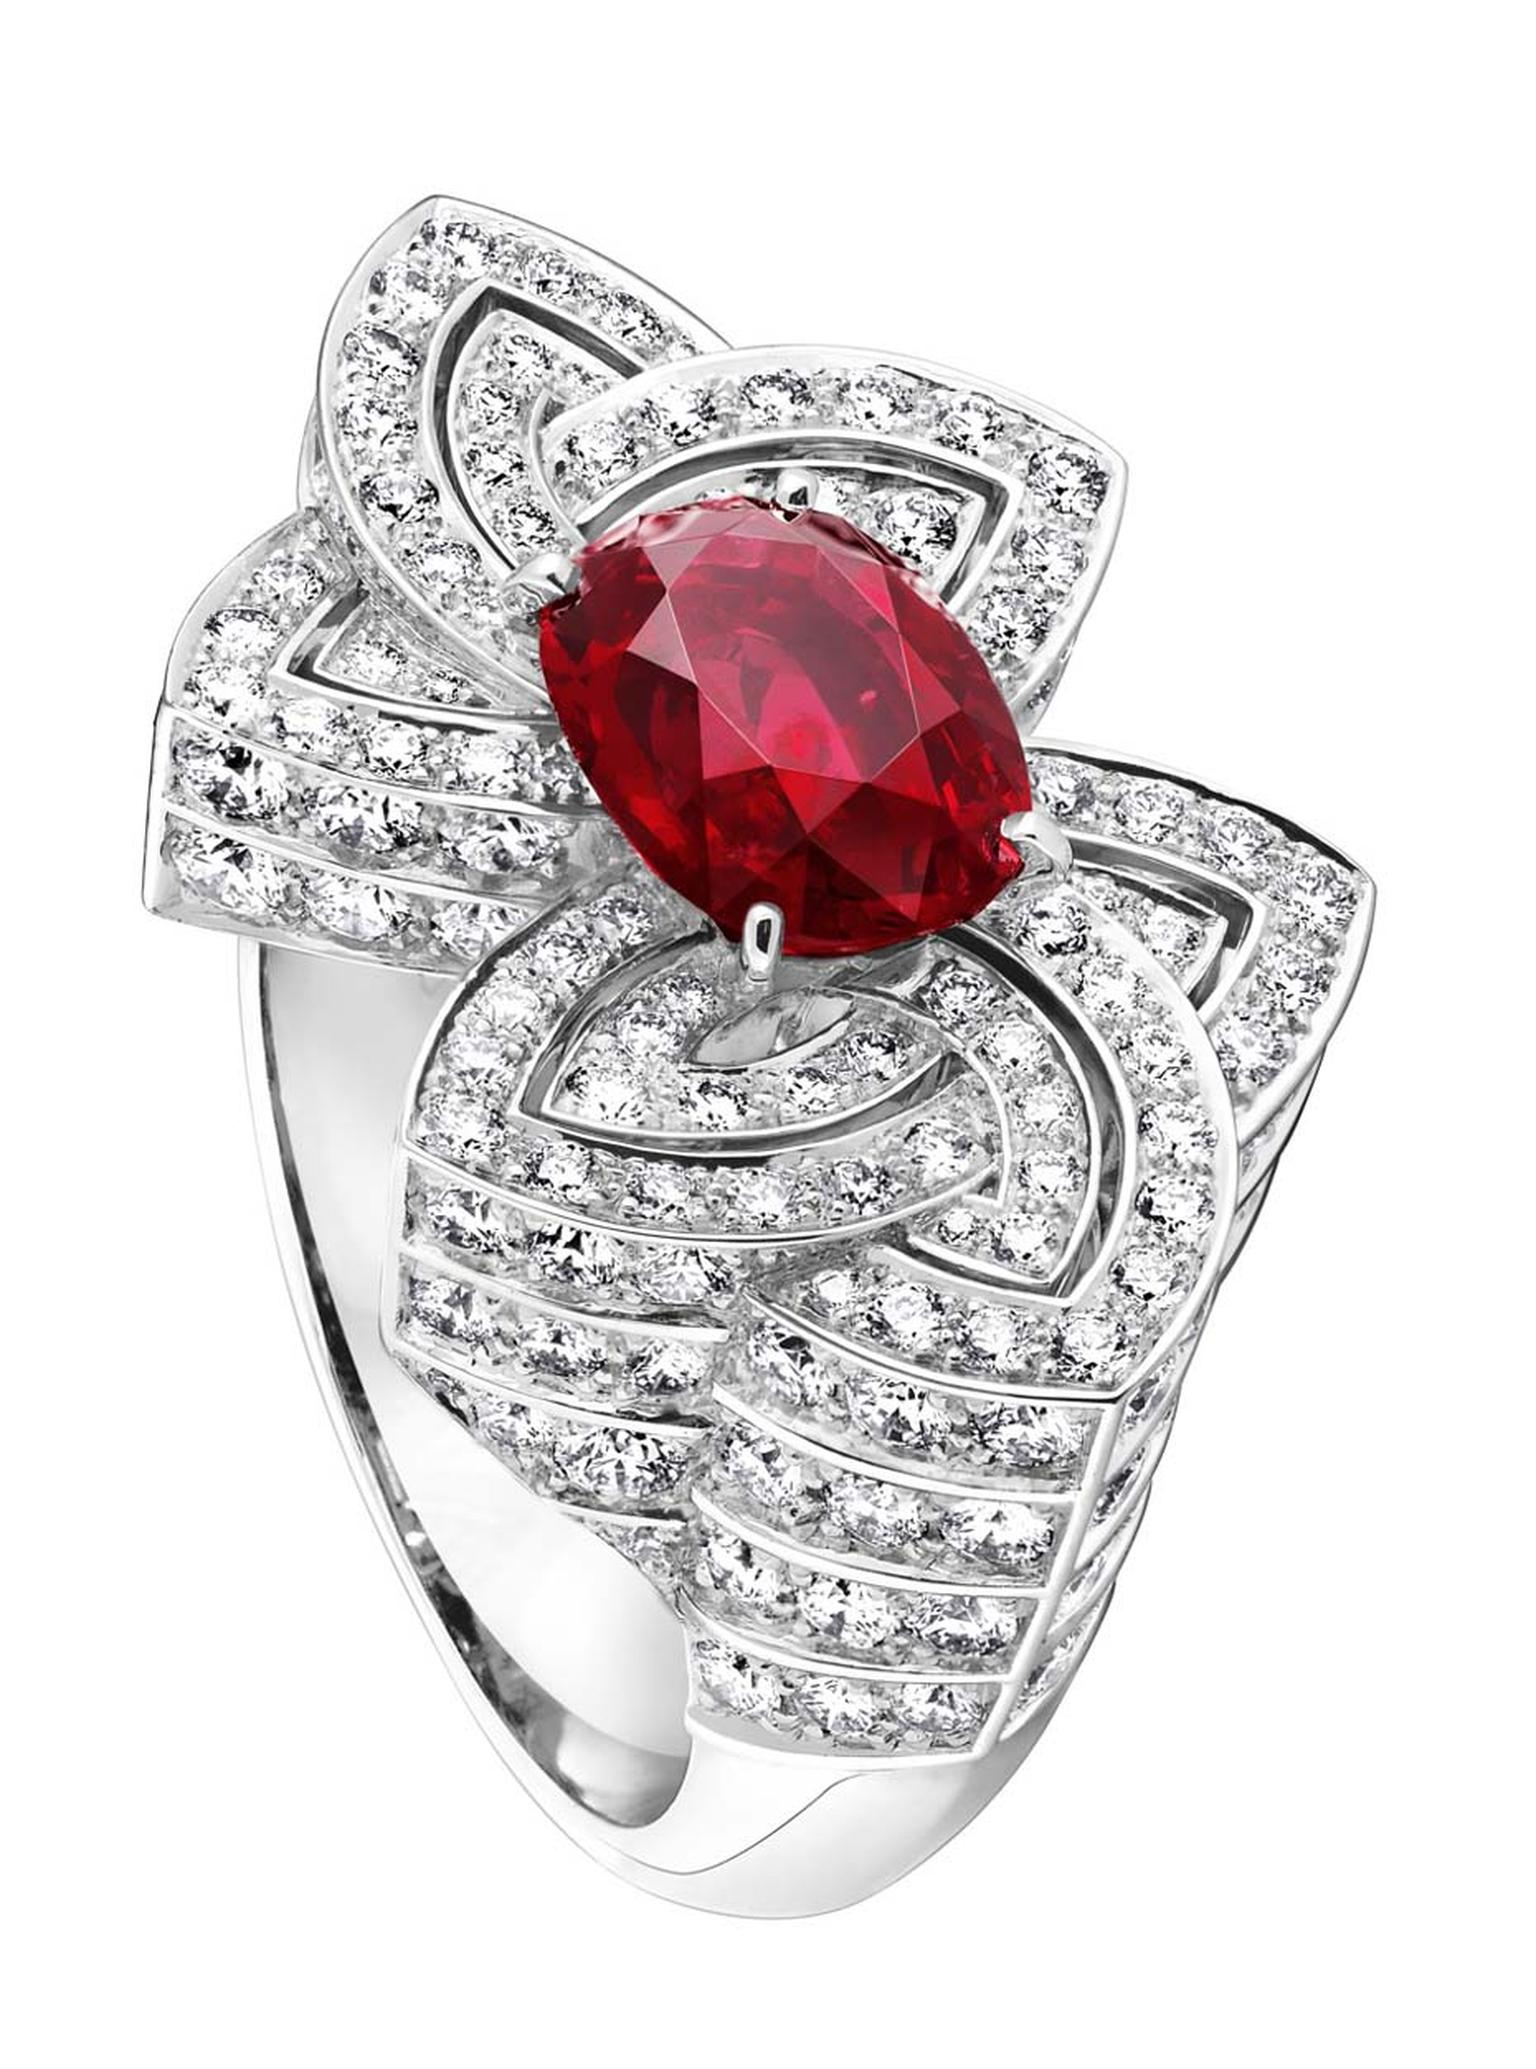 Louis Vuitton ring featuring a central African ruby, flanked by diamond-shaped petals.